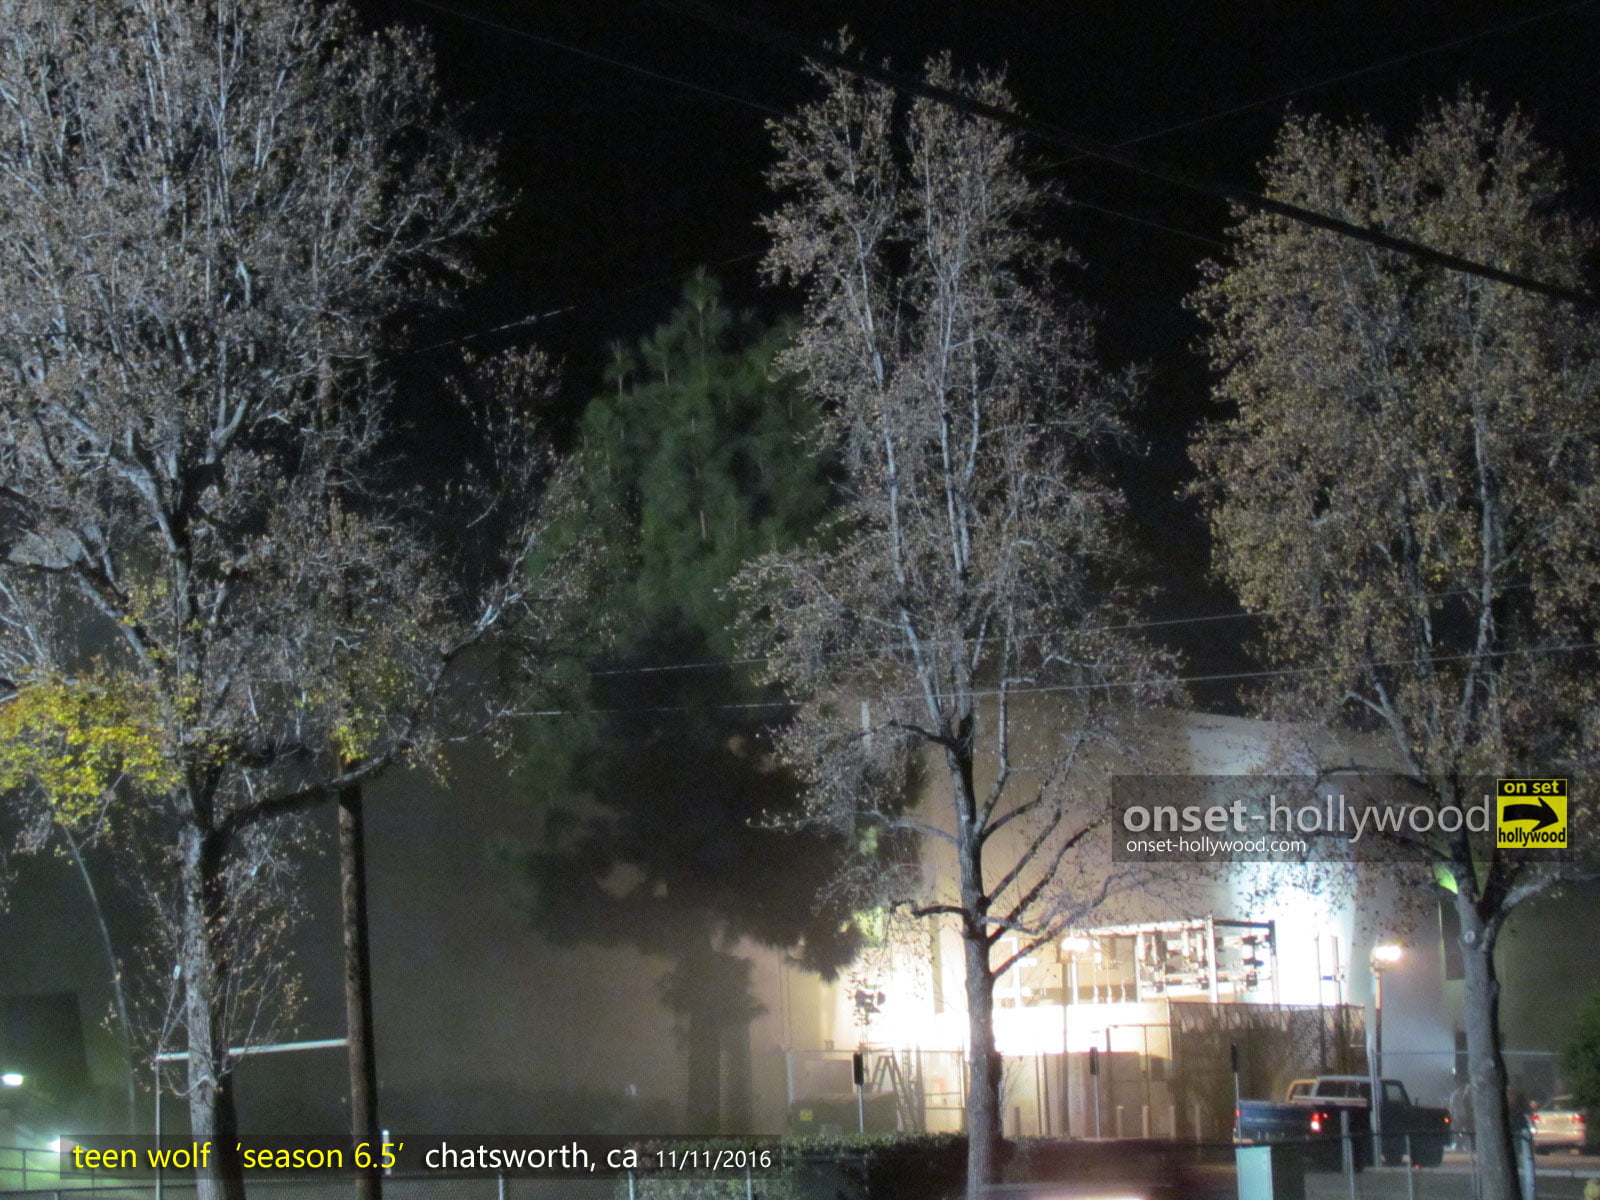 teen-wolf-season-6-b-filming-locations-soundstage-chatsworth-night-scenes-pic2